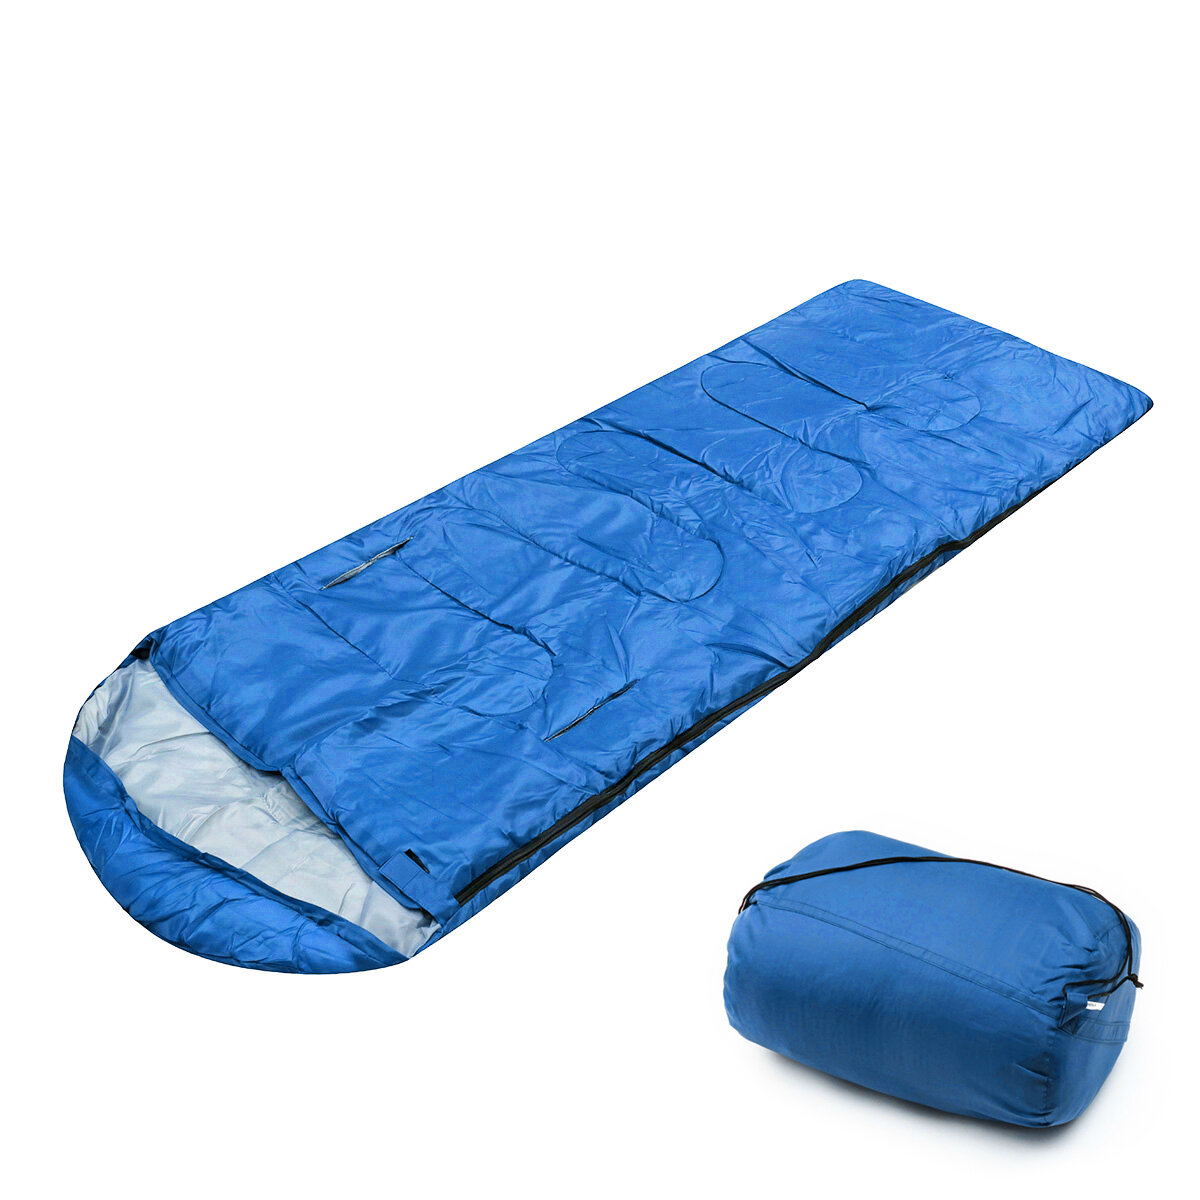 Image of 10x75CM Waterproof Camping Envelope Sleeping Bag Outdoor Hiking Backpacking Sleeping Bag with Compression Sack Case